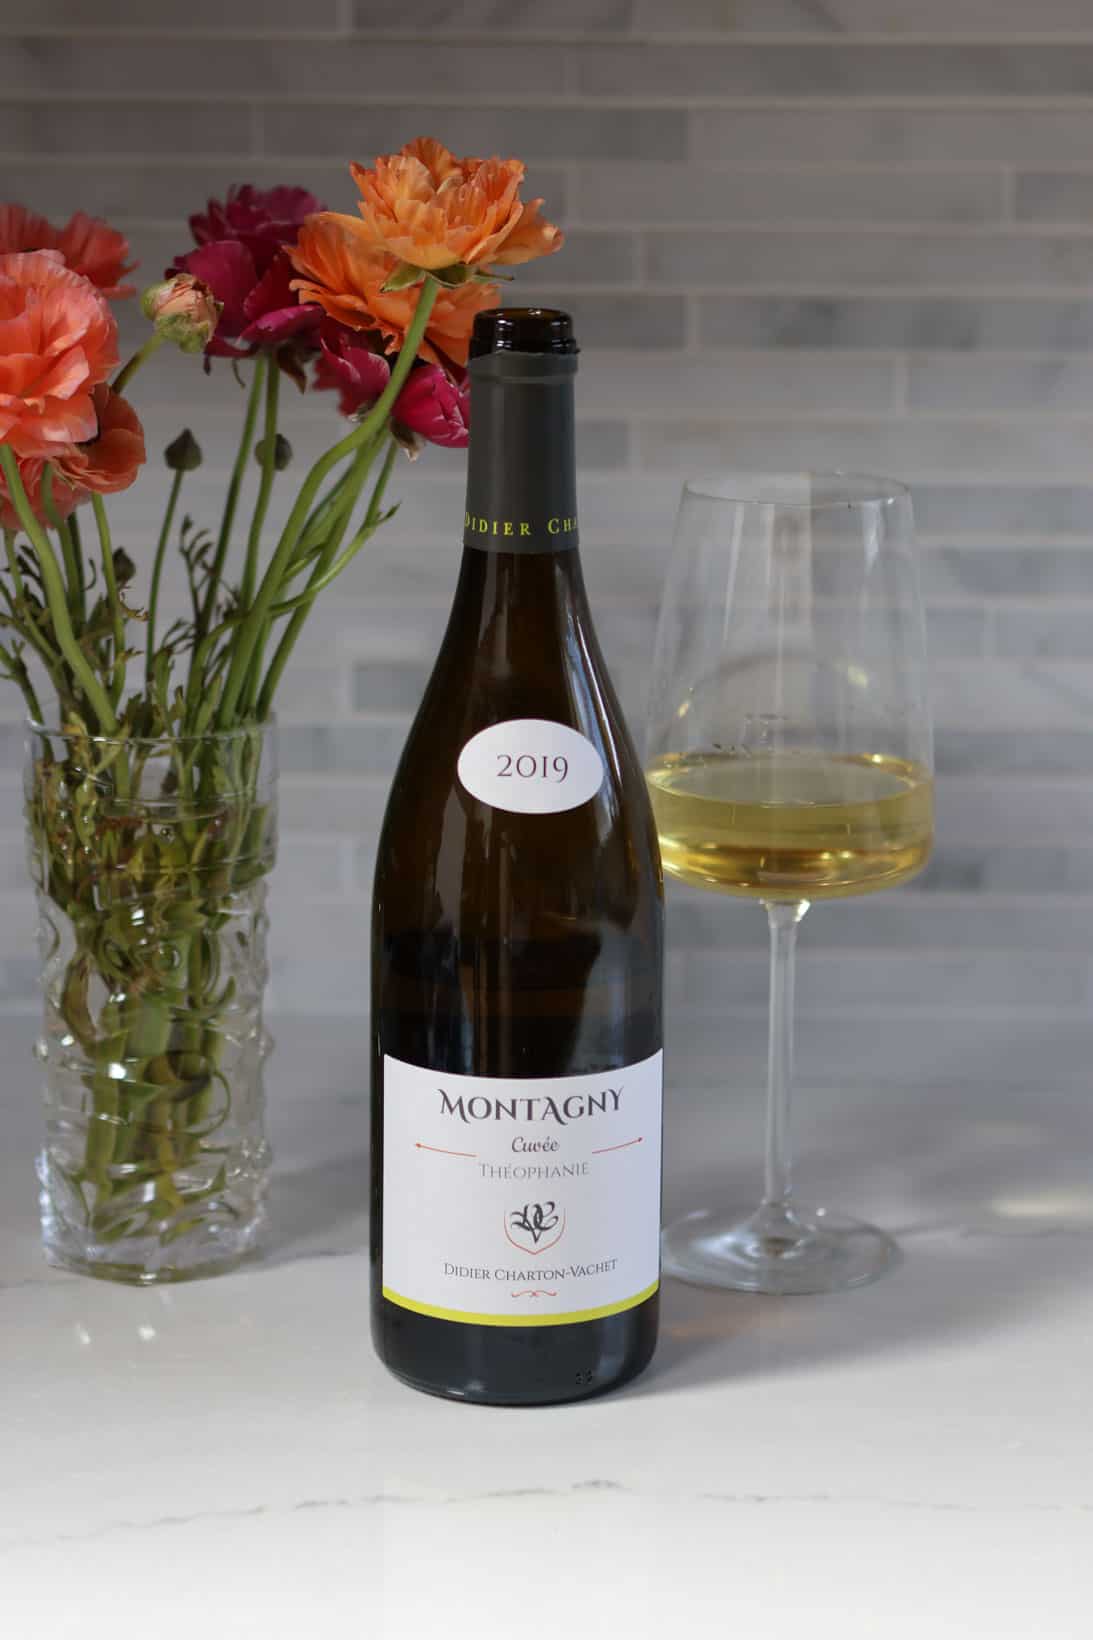 2019 Montagny Chardonnay bottle and glass of wine